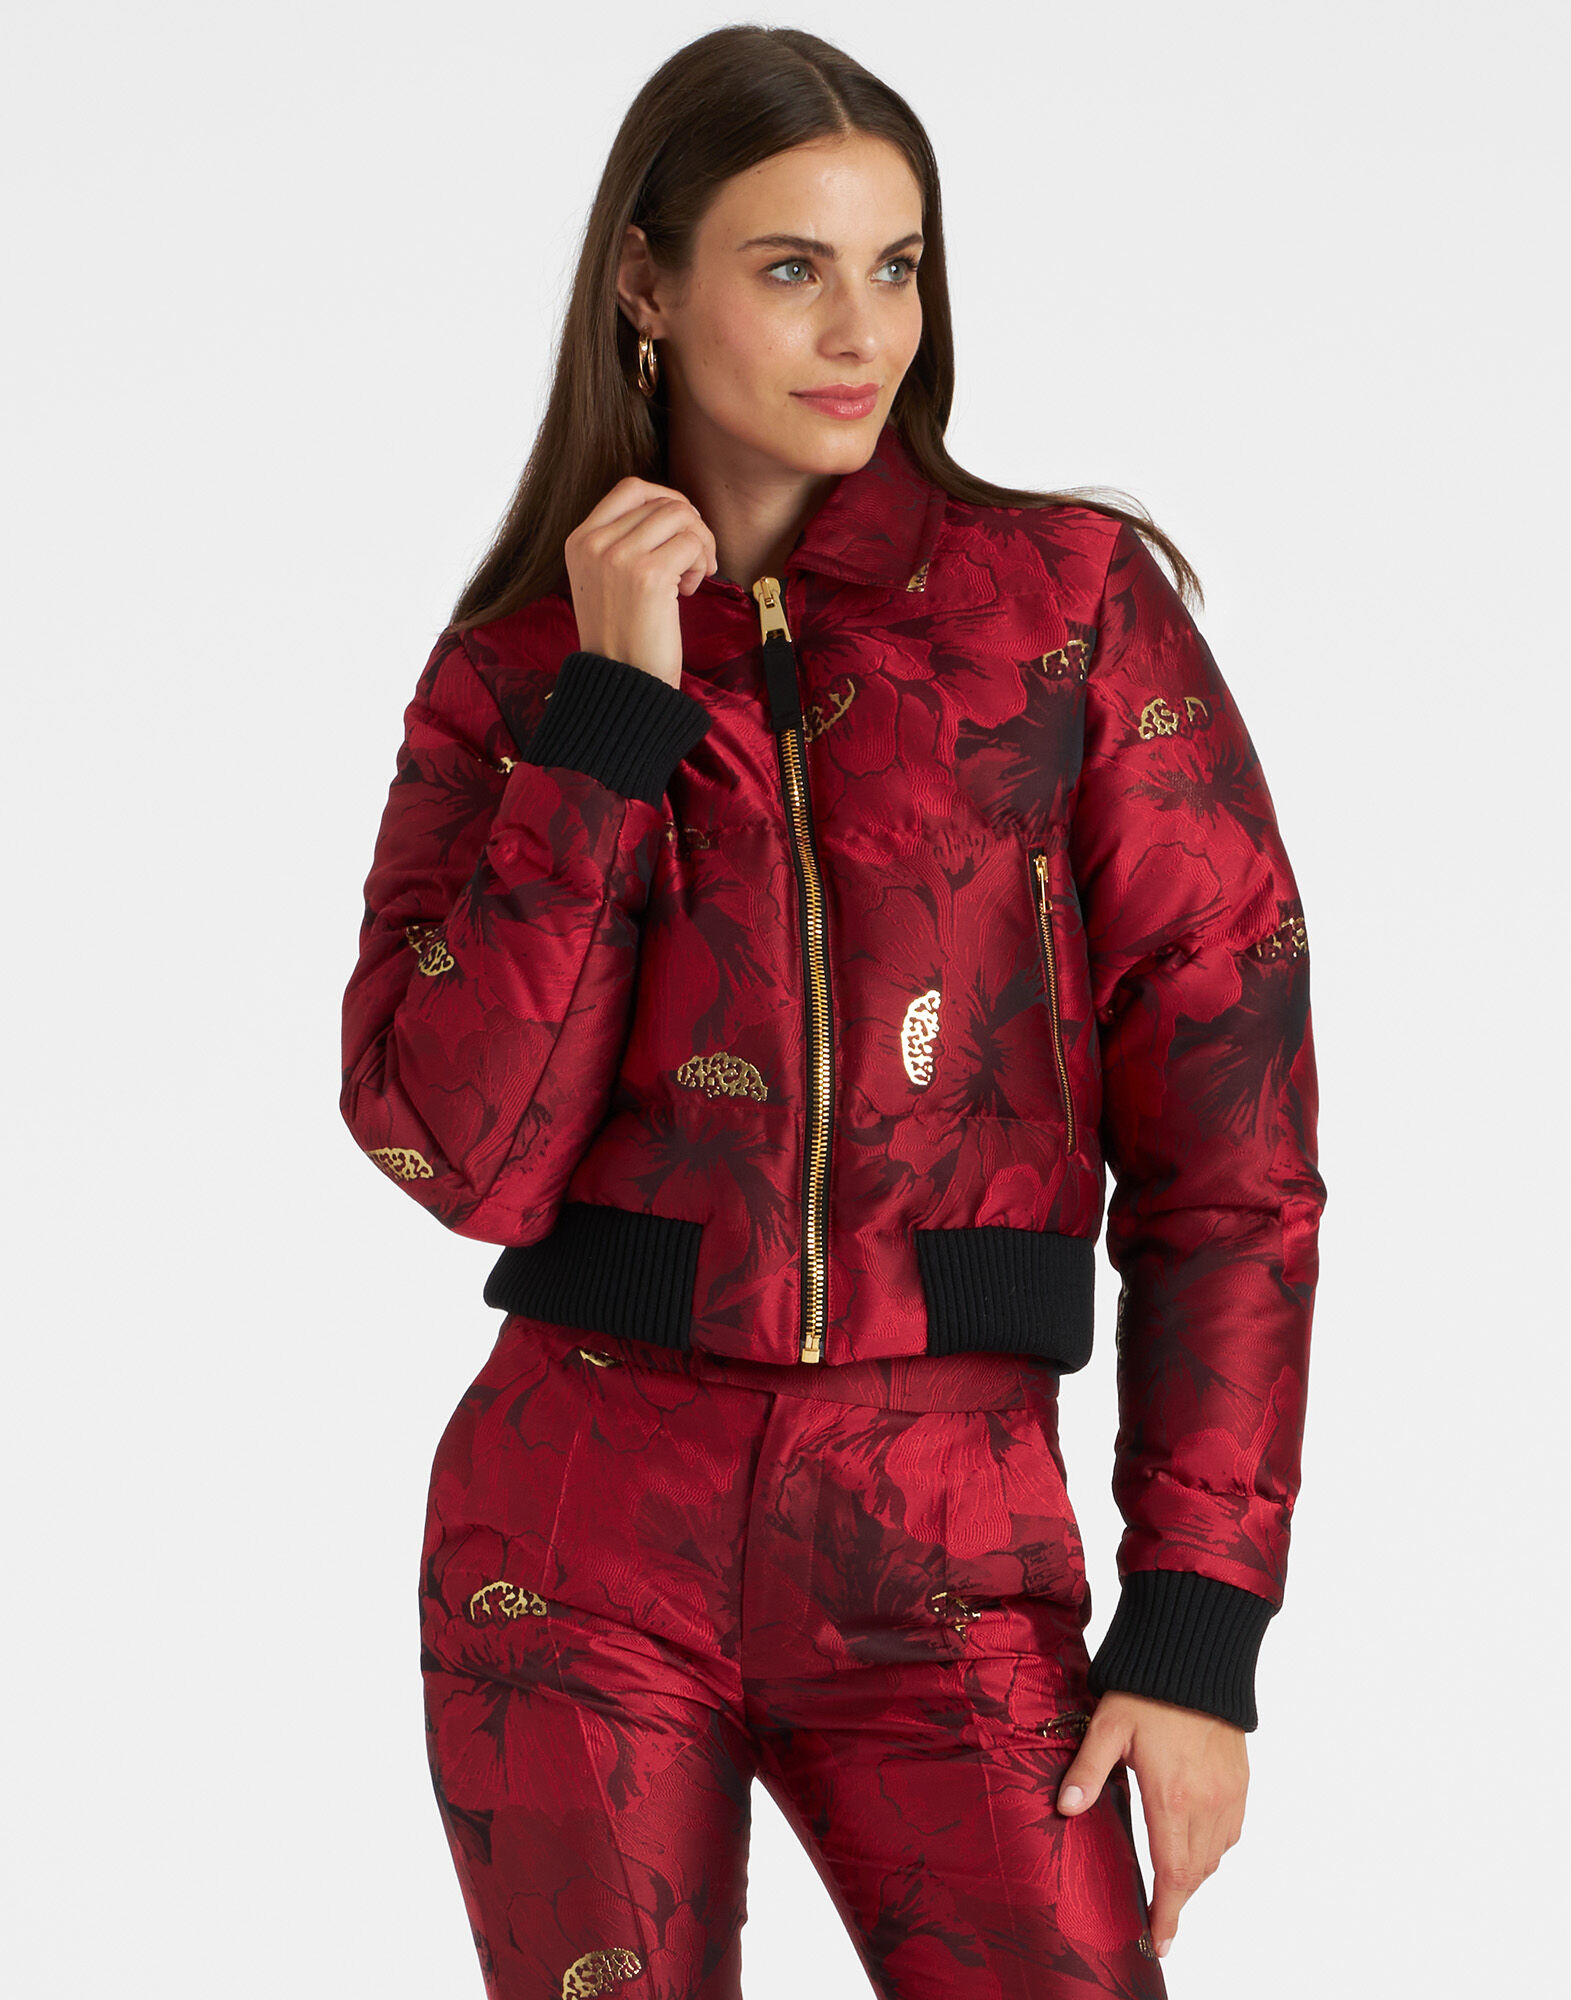 Roadster Bomber Jackets for Women sale - discounted price | FASHIOLA INDIA